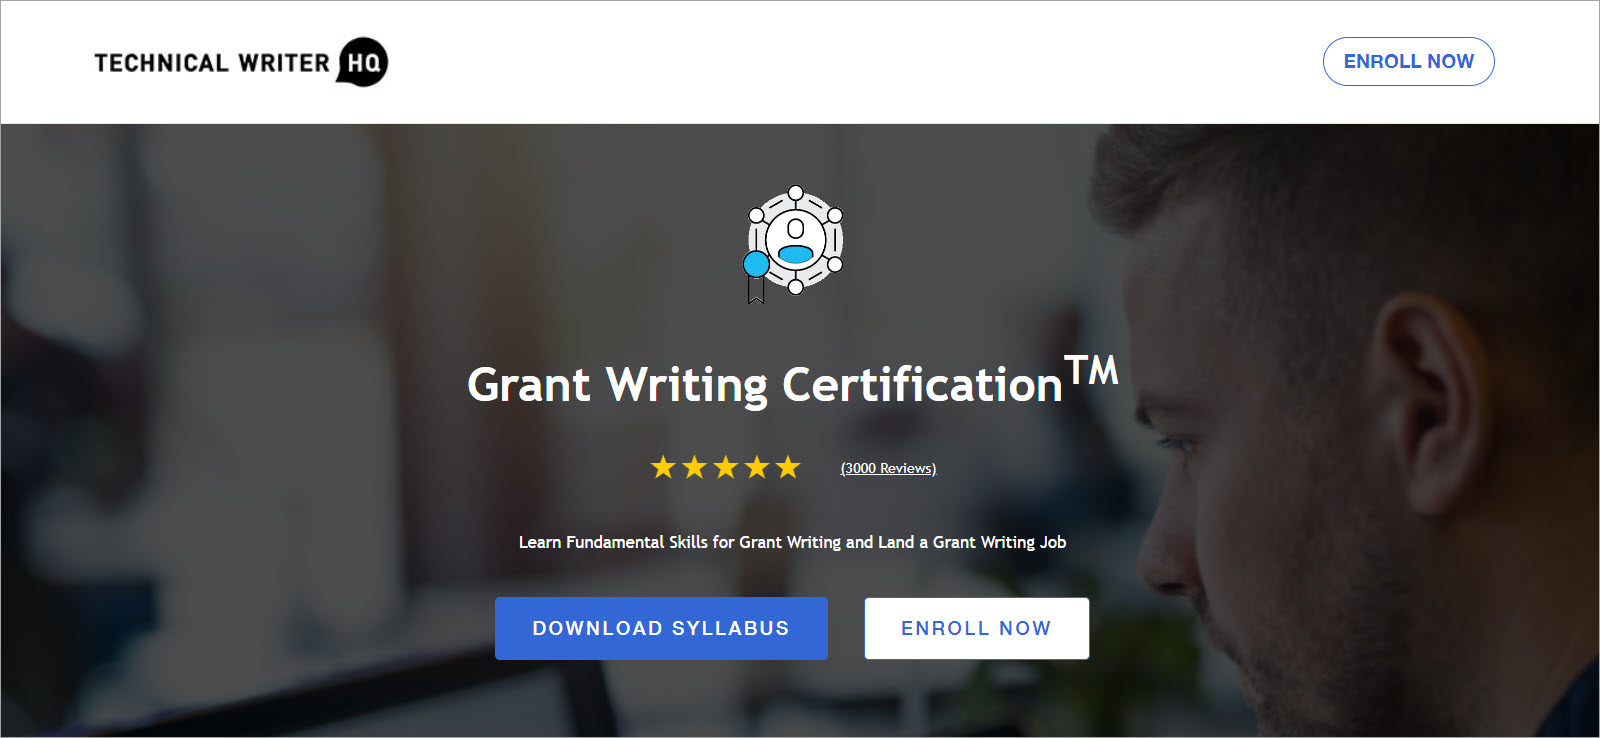 Grant writing certification